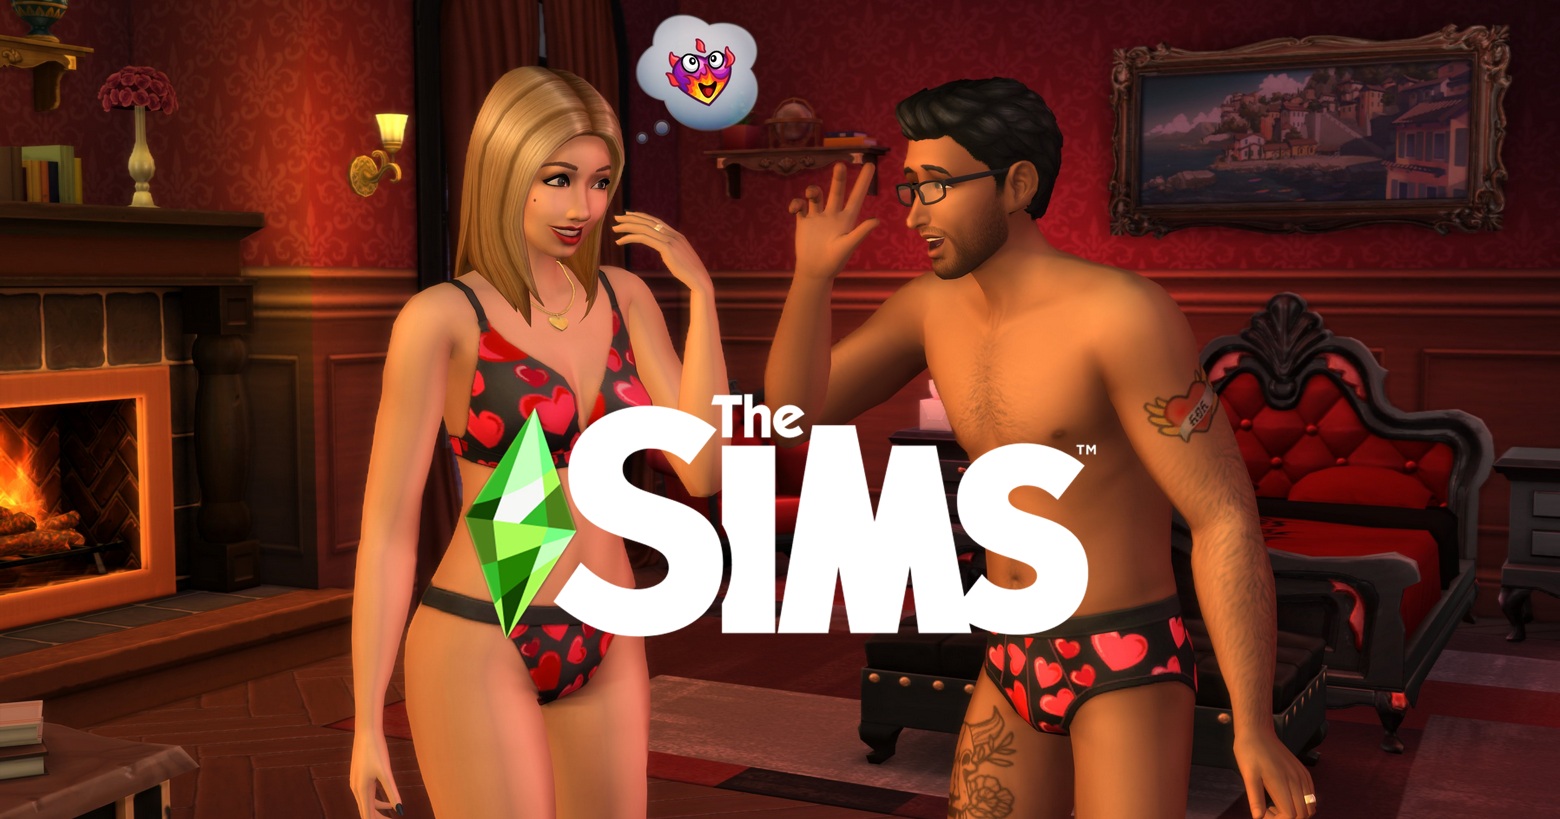 An erotic scene like this will certainly be playable in Sims 5, because as we all know, sex sells. In this in-game screenshot we see a light-skinned middle-aged blonde Sim woman with shoulder-length hair and a tanned Sim man with short black hair and glasses facing each other in sexy dark underwear with red hearts on it. The man seems to be joking, and the woman is smiling shyly. Above her is a speech bubble with a devilish heart emoji suggesting that the two are about to have sex with each other. The characters are standing in a cozy furnished room with lots of red tones, the fireplace is burning in the background on the left, a bed with a dark wooden frame and red covers can be seen in the background on the right. On the wall above it hangs a rectangular oil painting with a harbour scene.